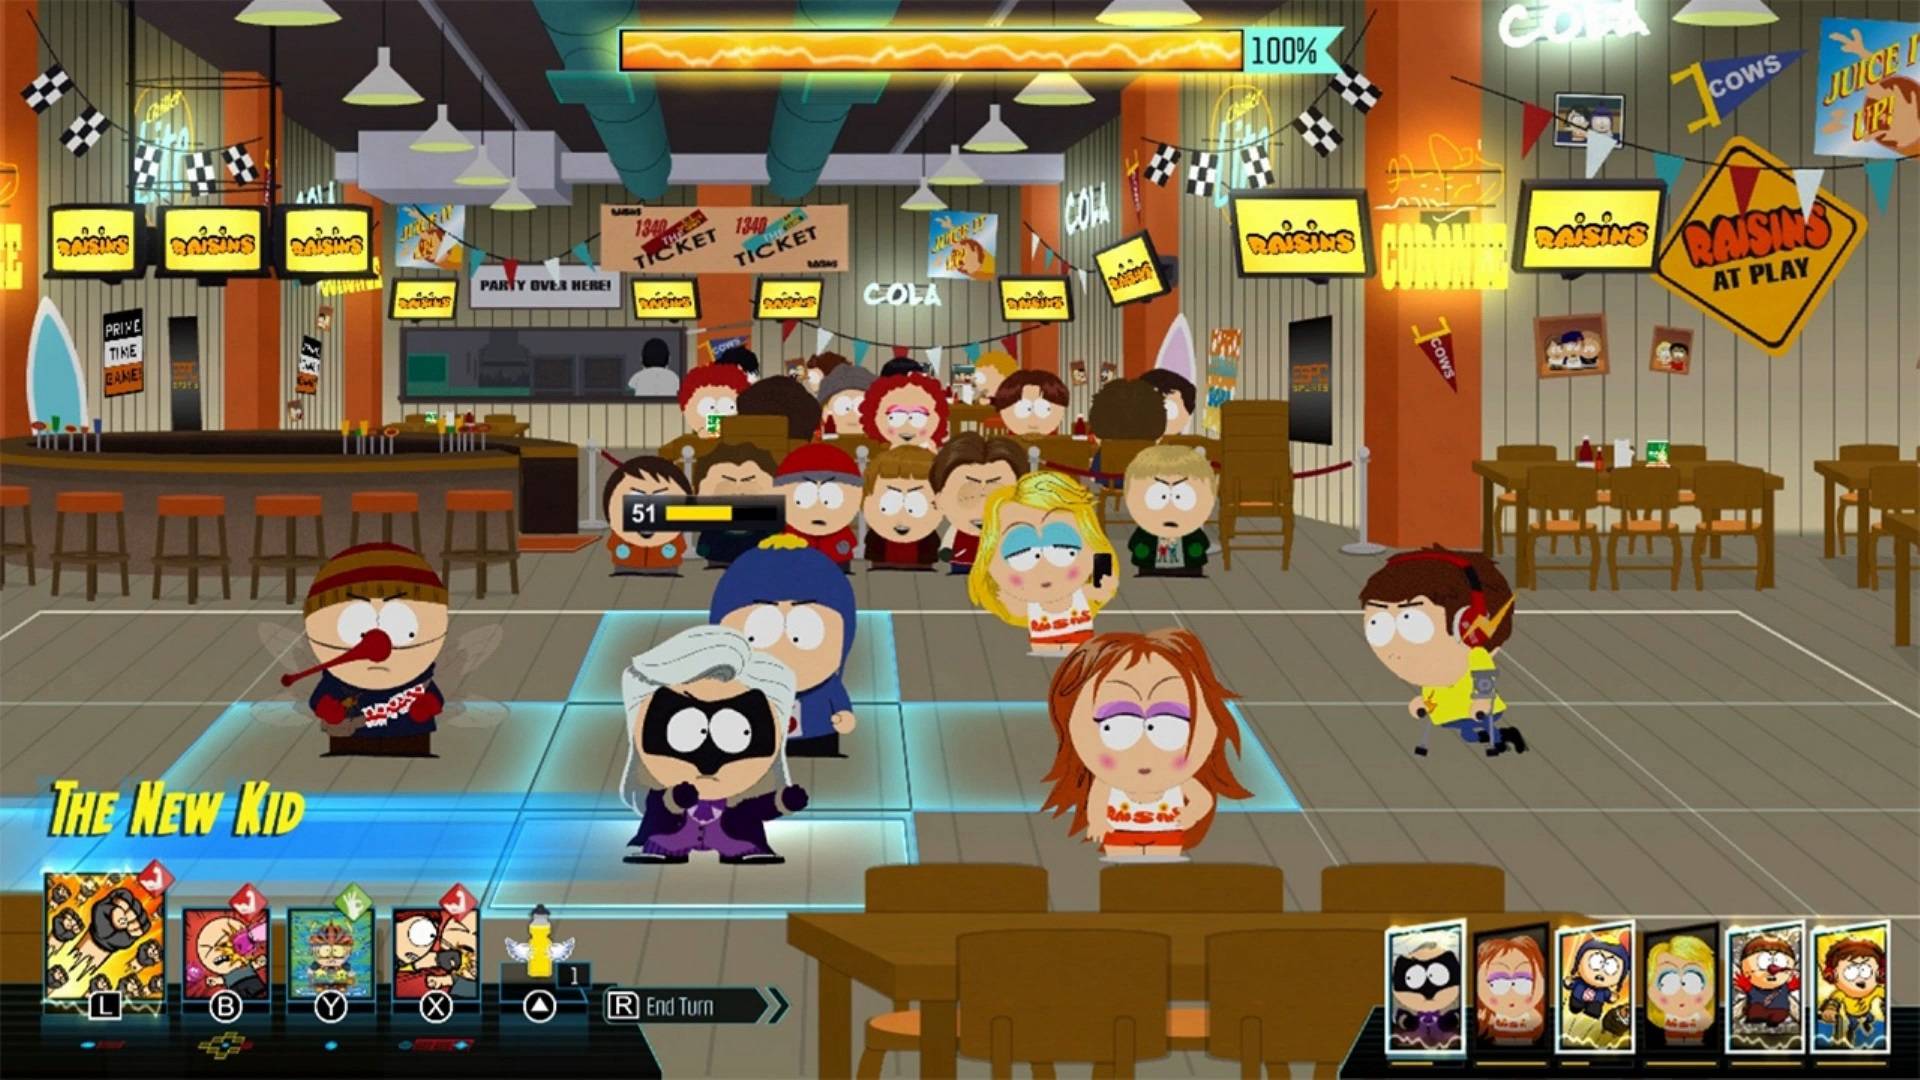 Funny games: several South Park characters are locked in battle 